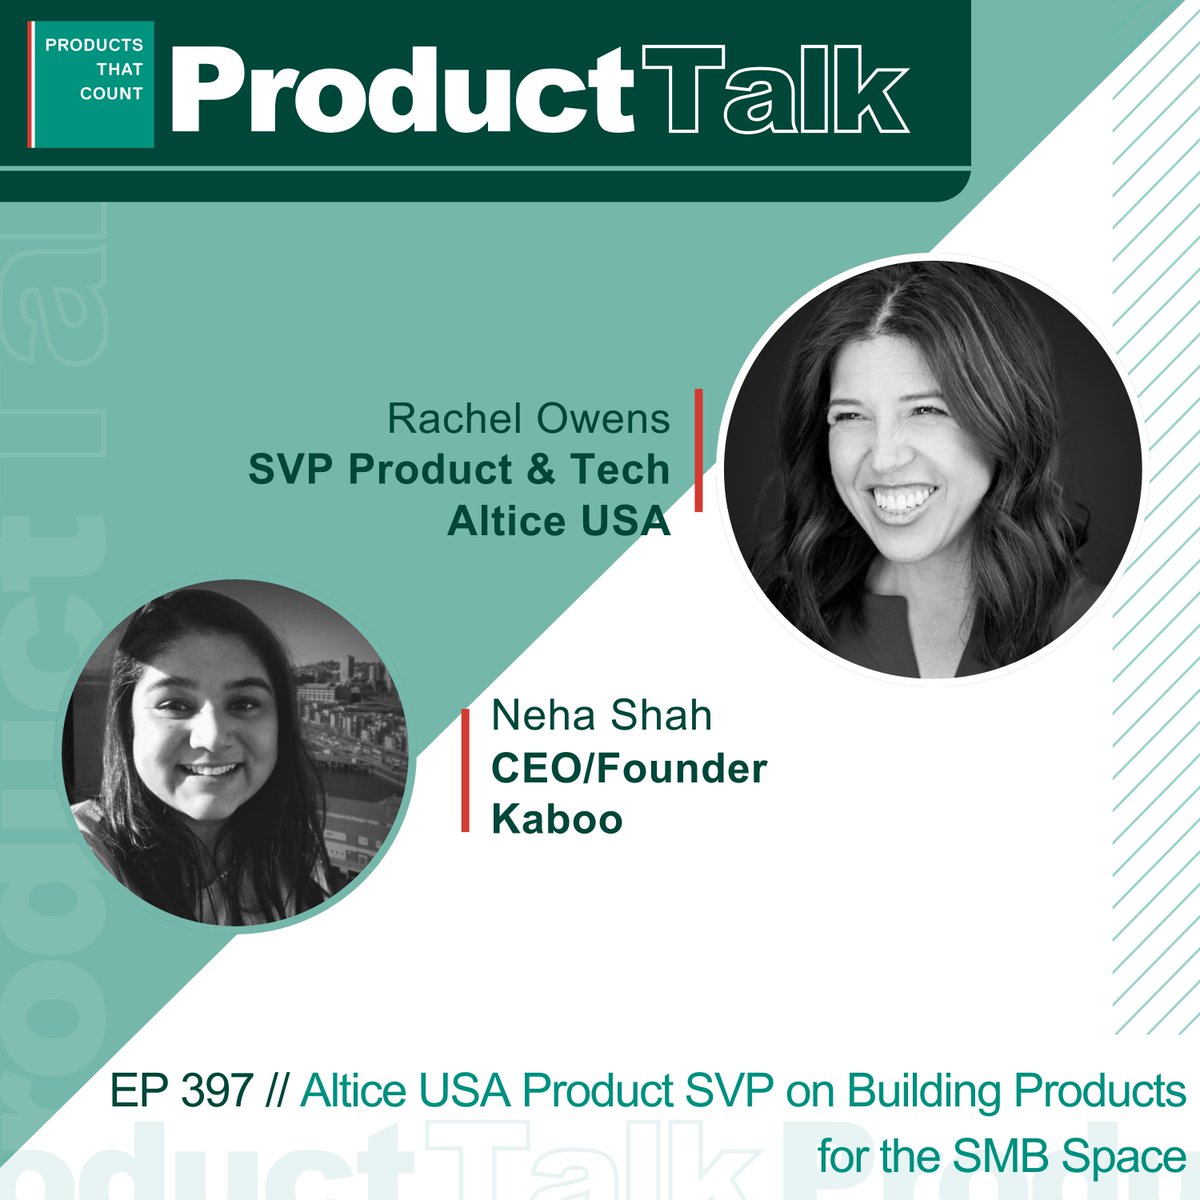 Join us for the latest episode of Product Talk hosted by Kaboo Founder Neha Shah, Altice USA Product & Tech SVP Rachel Owens shares insights from her diverse career journey in product management. Tune in here: productsthatcount.com/altice-usa-pro…